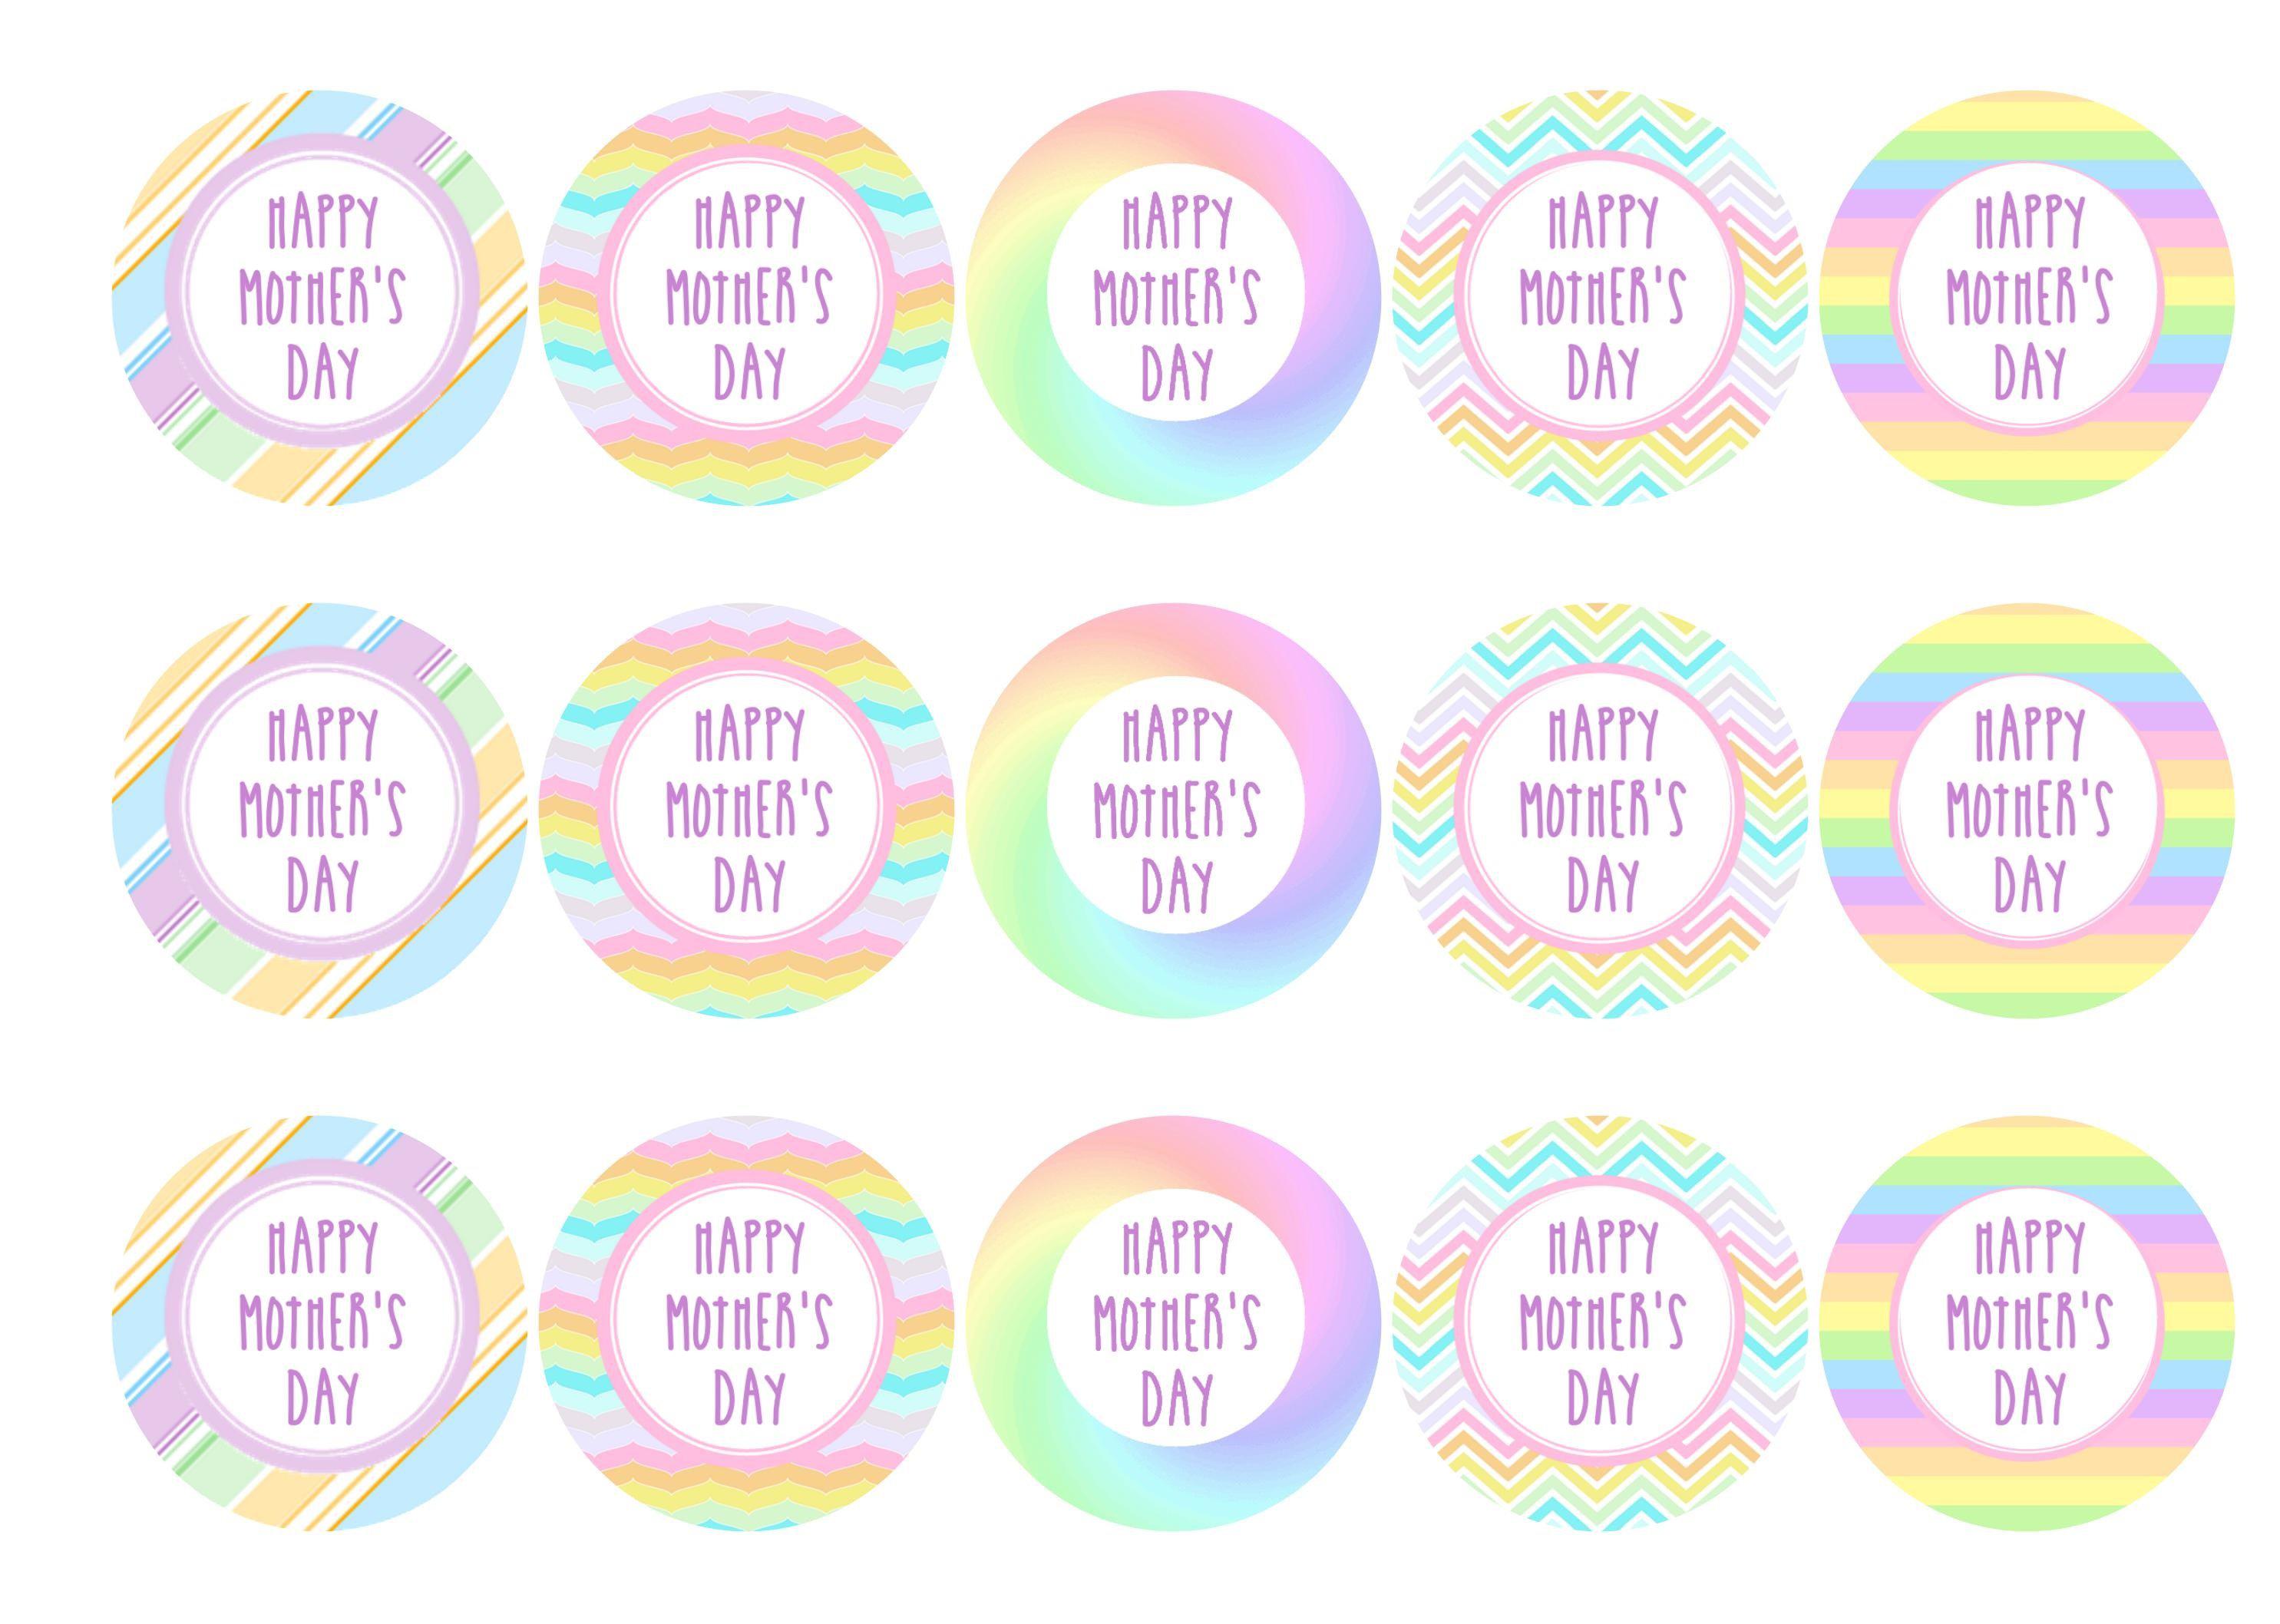 Printed Mother's Day cupcake toppers designed with a pastel theme